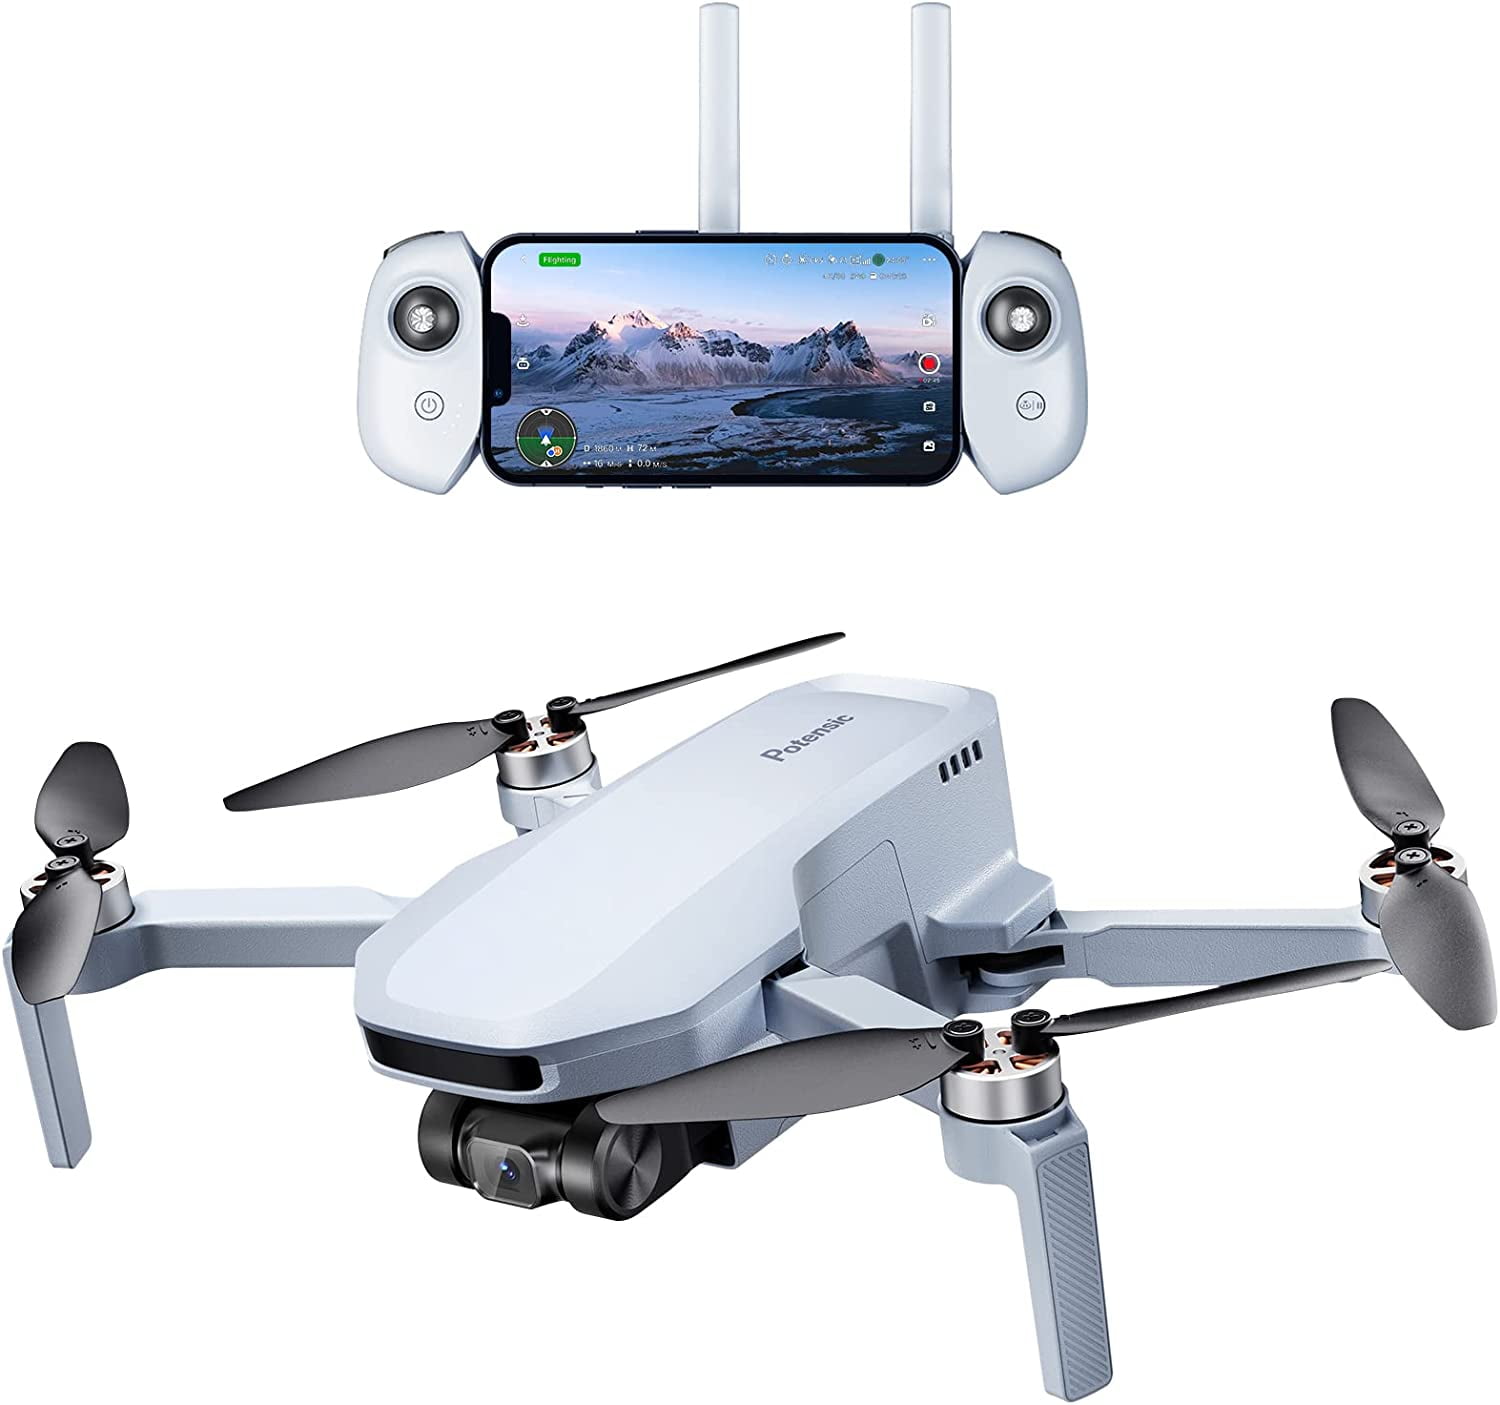 Potensic's latest Atom SE 4K drone captures 12MP RAW photos from the air at  low of $250